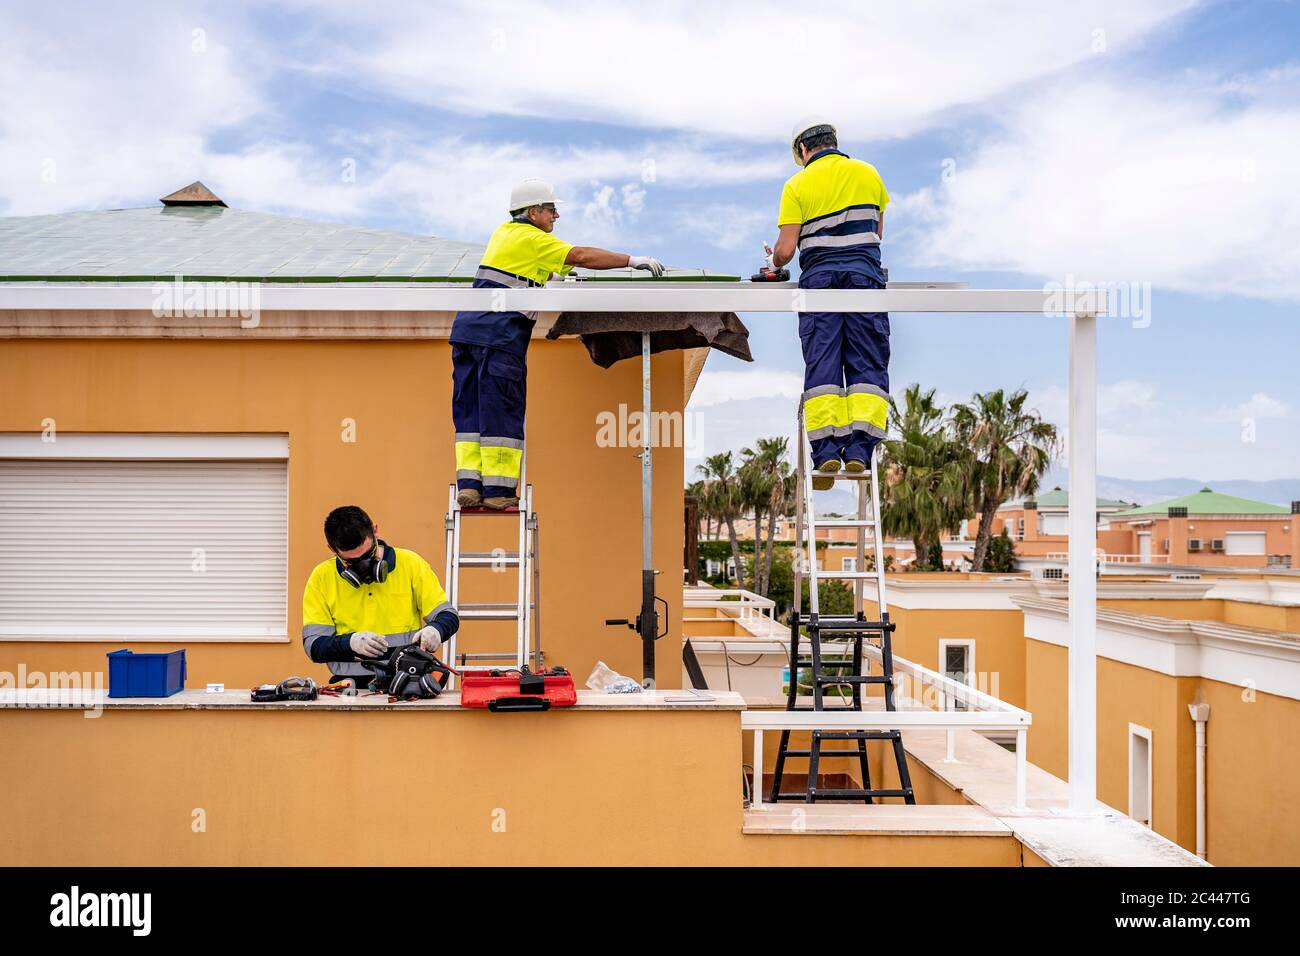 Male technicians installing solar panels on house roof against cloudy sky Stock Photo